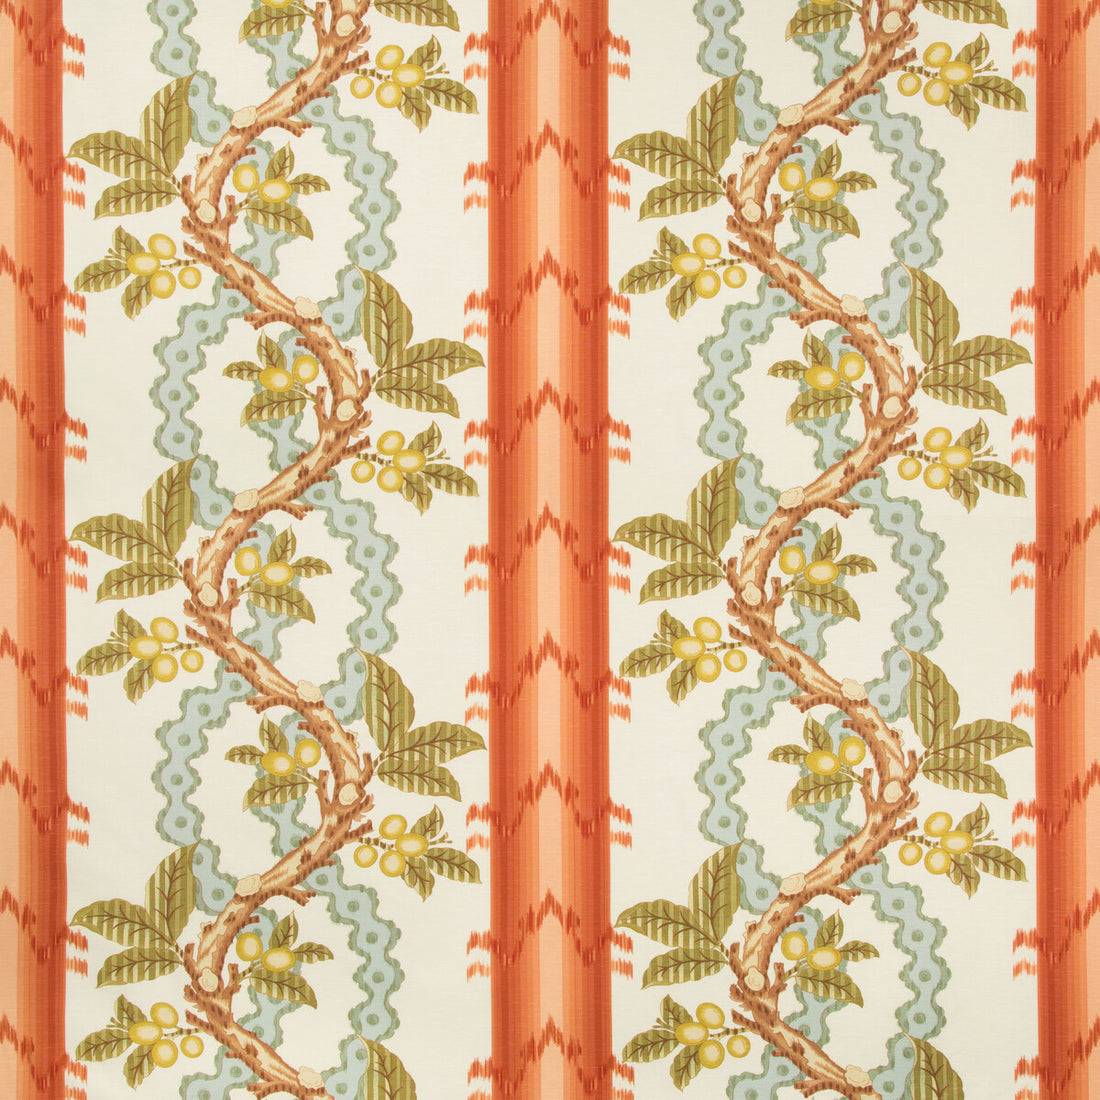 Josselin Cotton And Linen Print fabric in spice/celadon color - pattern BR-79510.123.0 - by Brunschwig &amp; Fils in the Cevennes collection